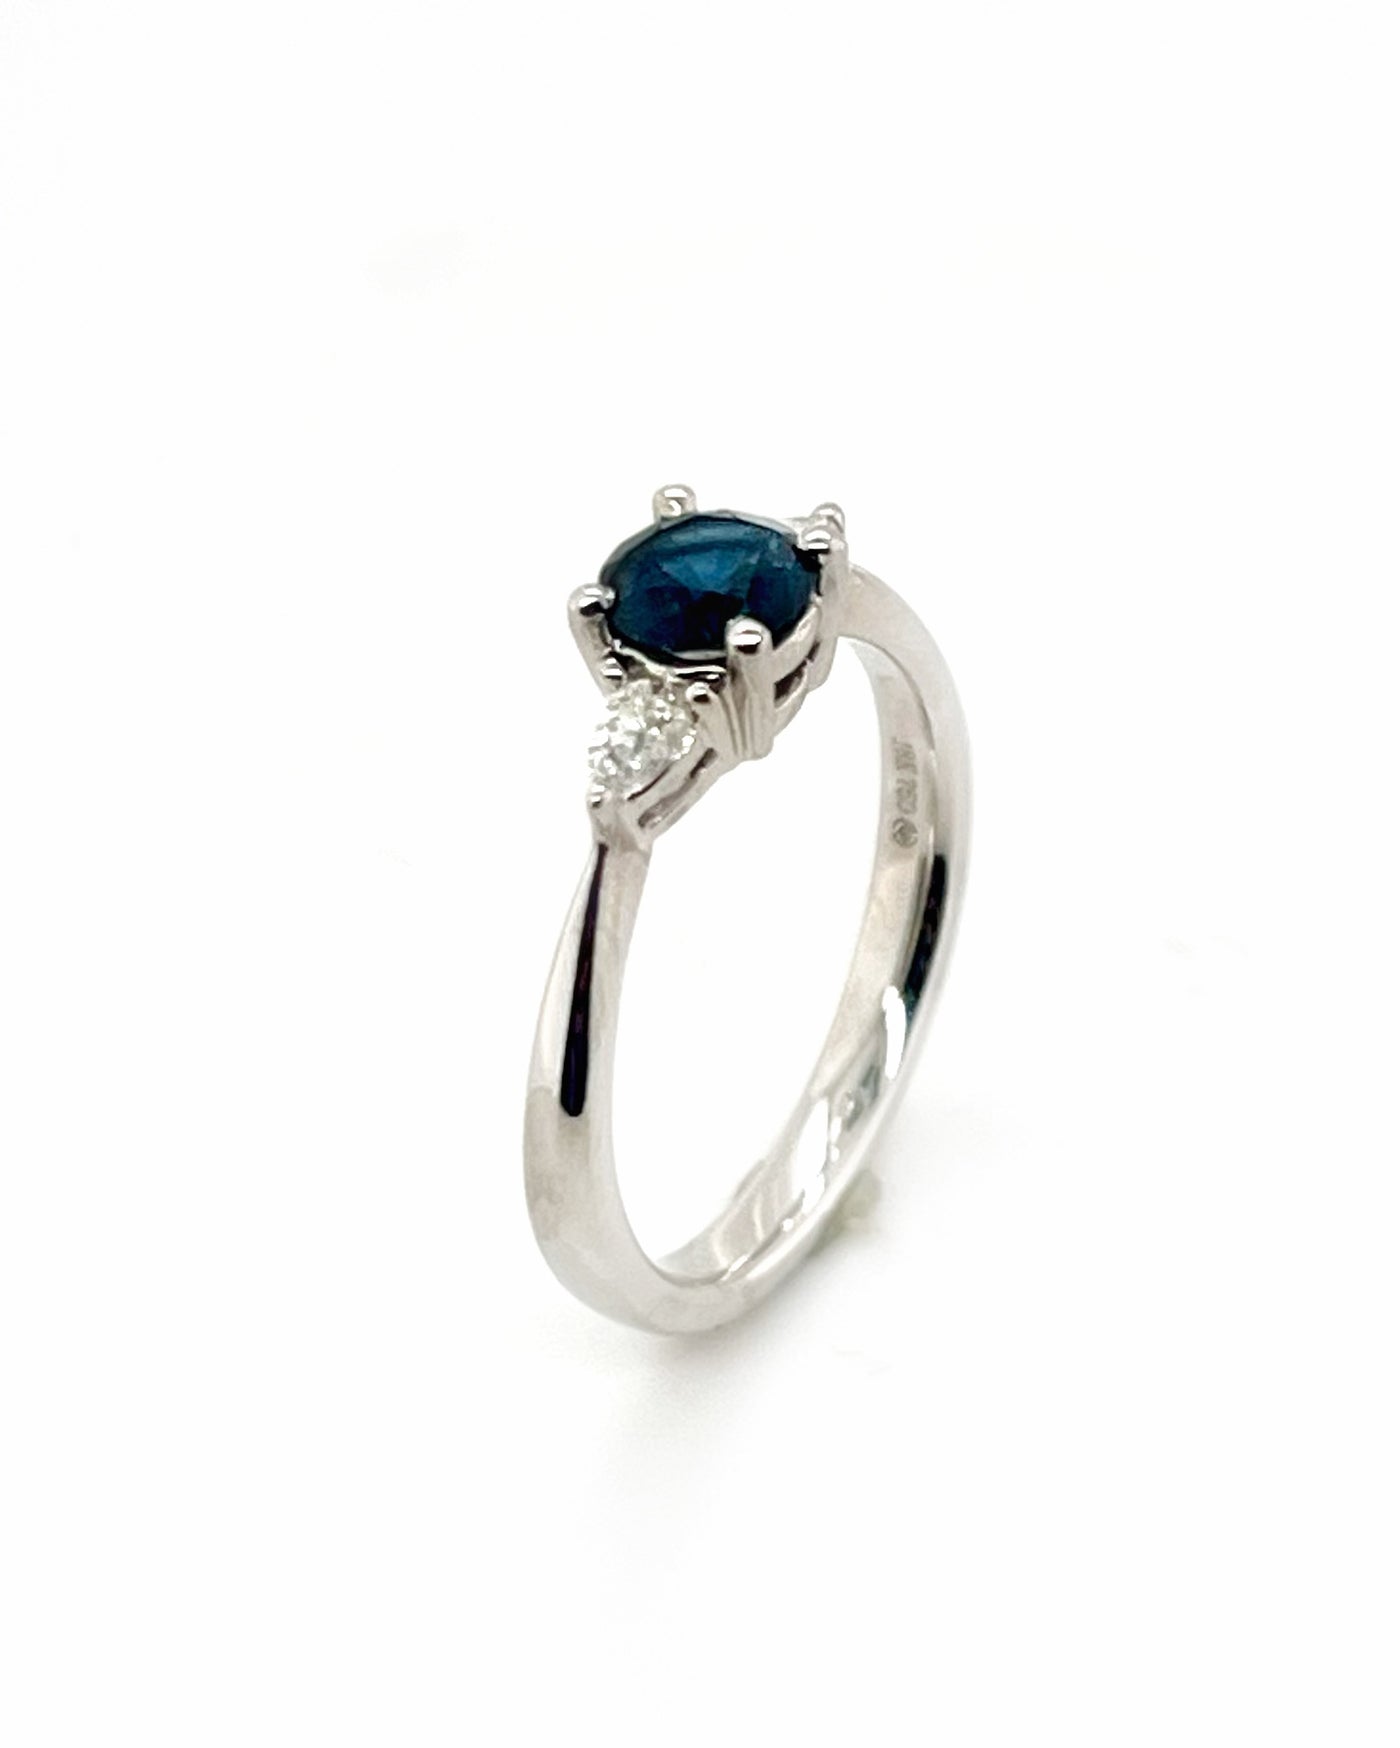 Untreated Queensland Sapphire ring